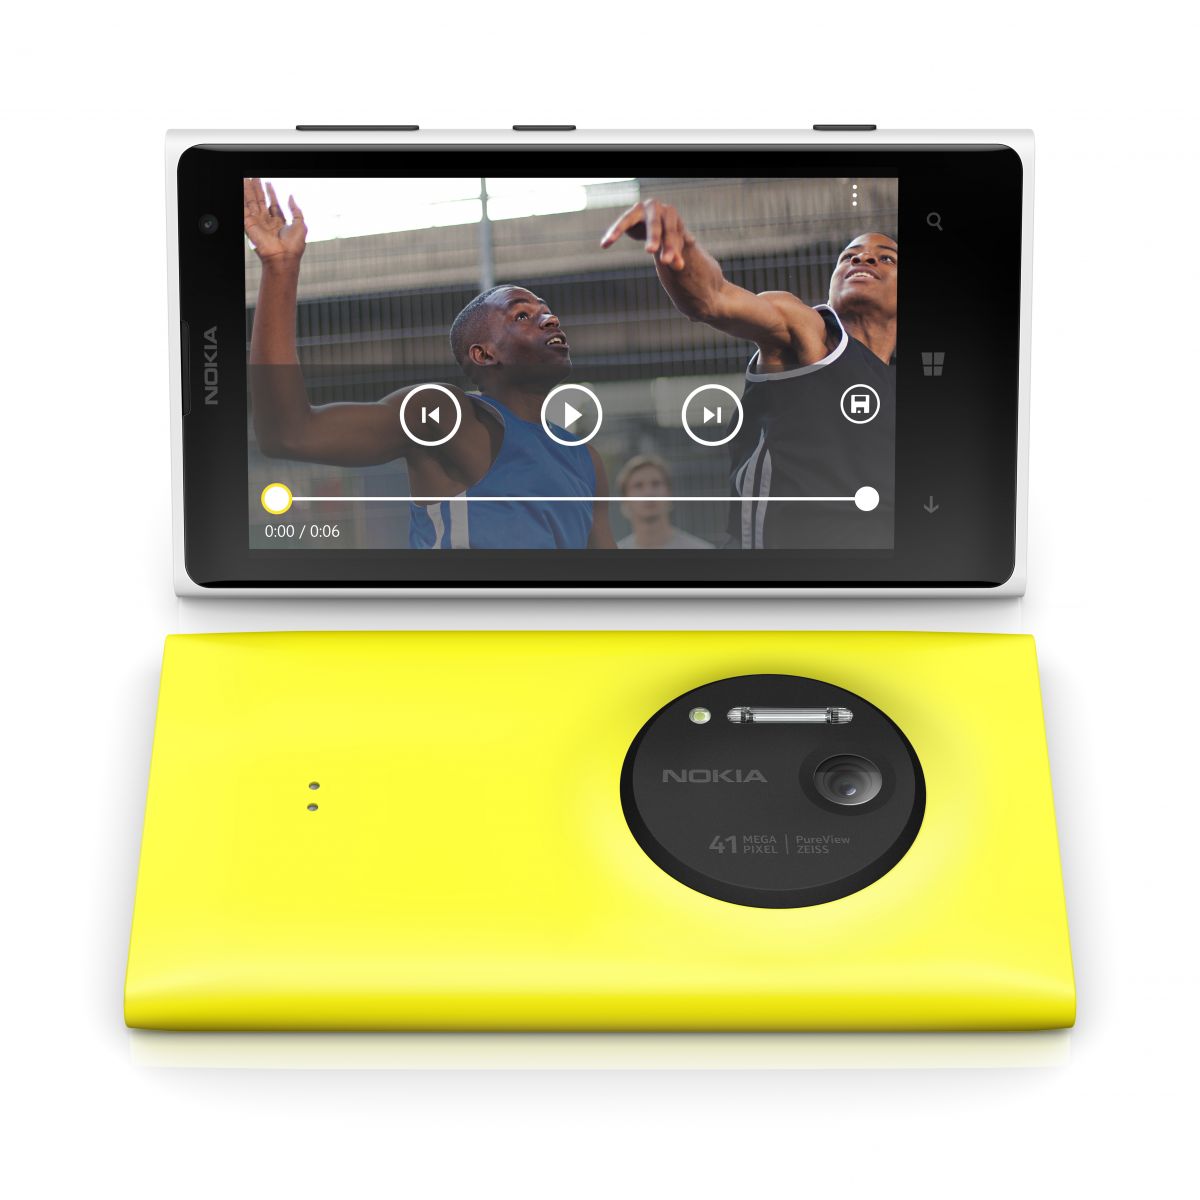 The new Lumia 1020, launched in New York